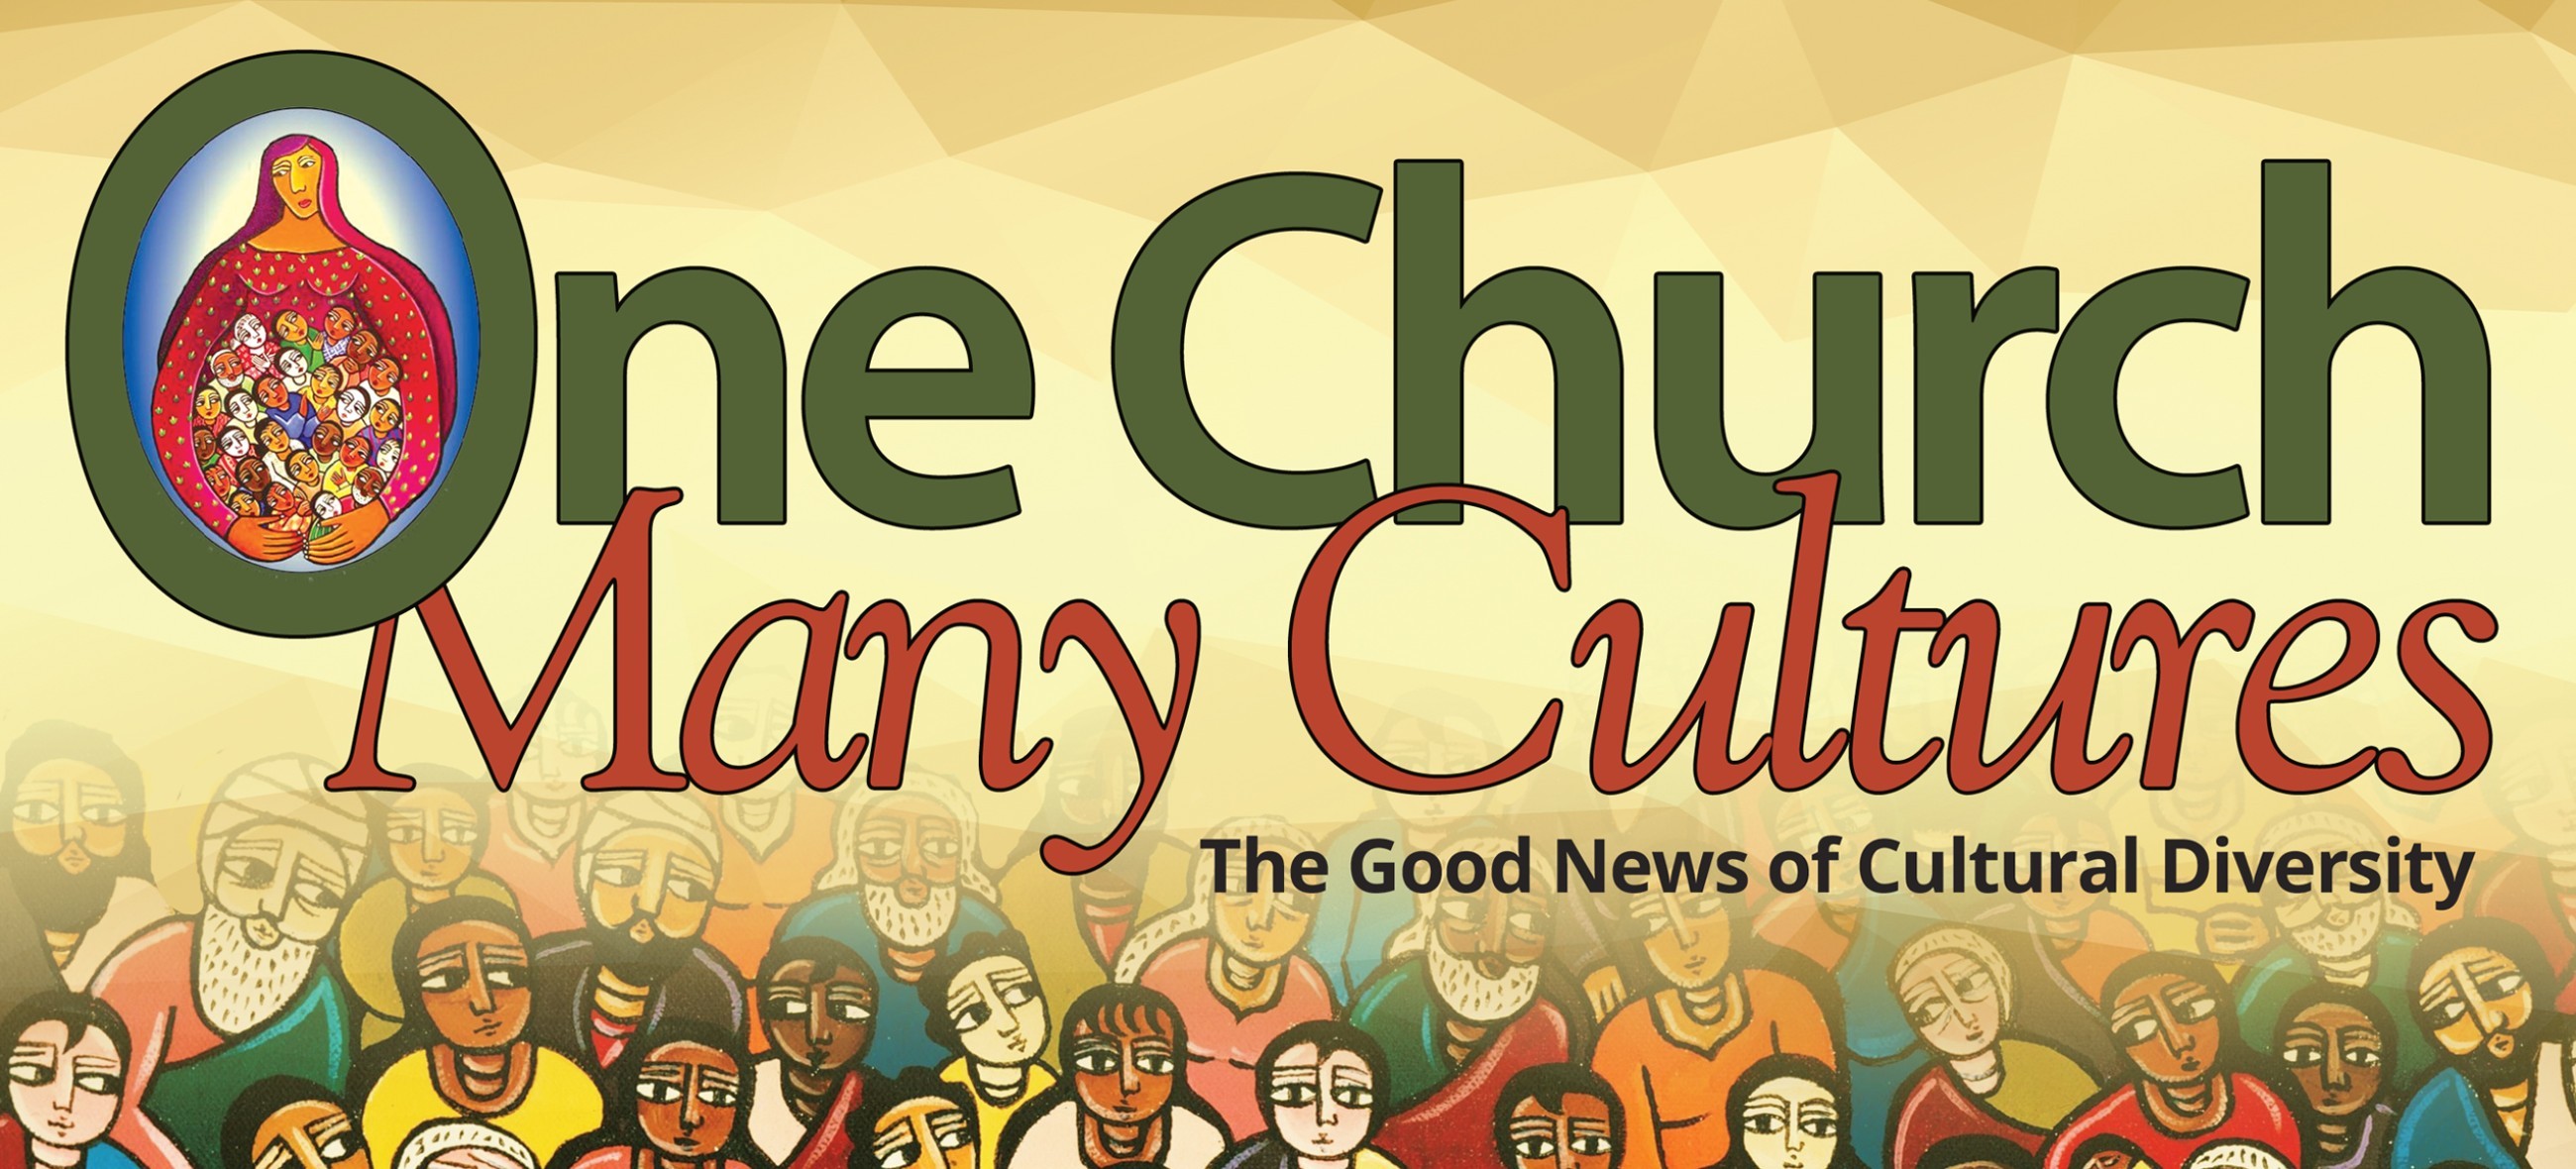 Cultural Diversity Spring 2021 Newsletter - One Church, Many Cultures 